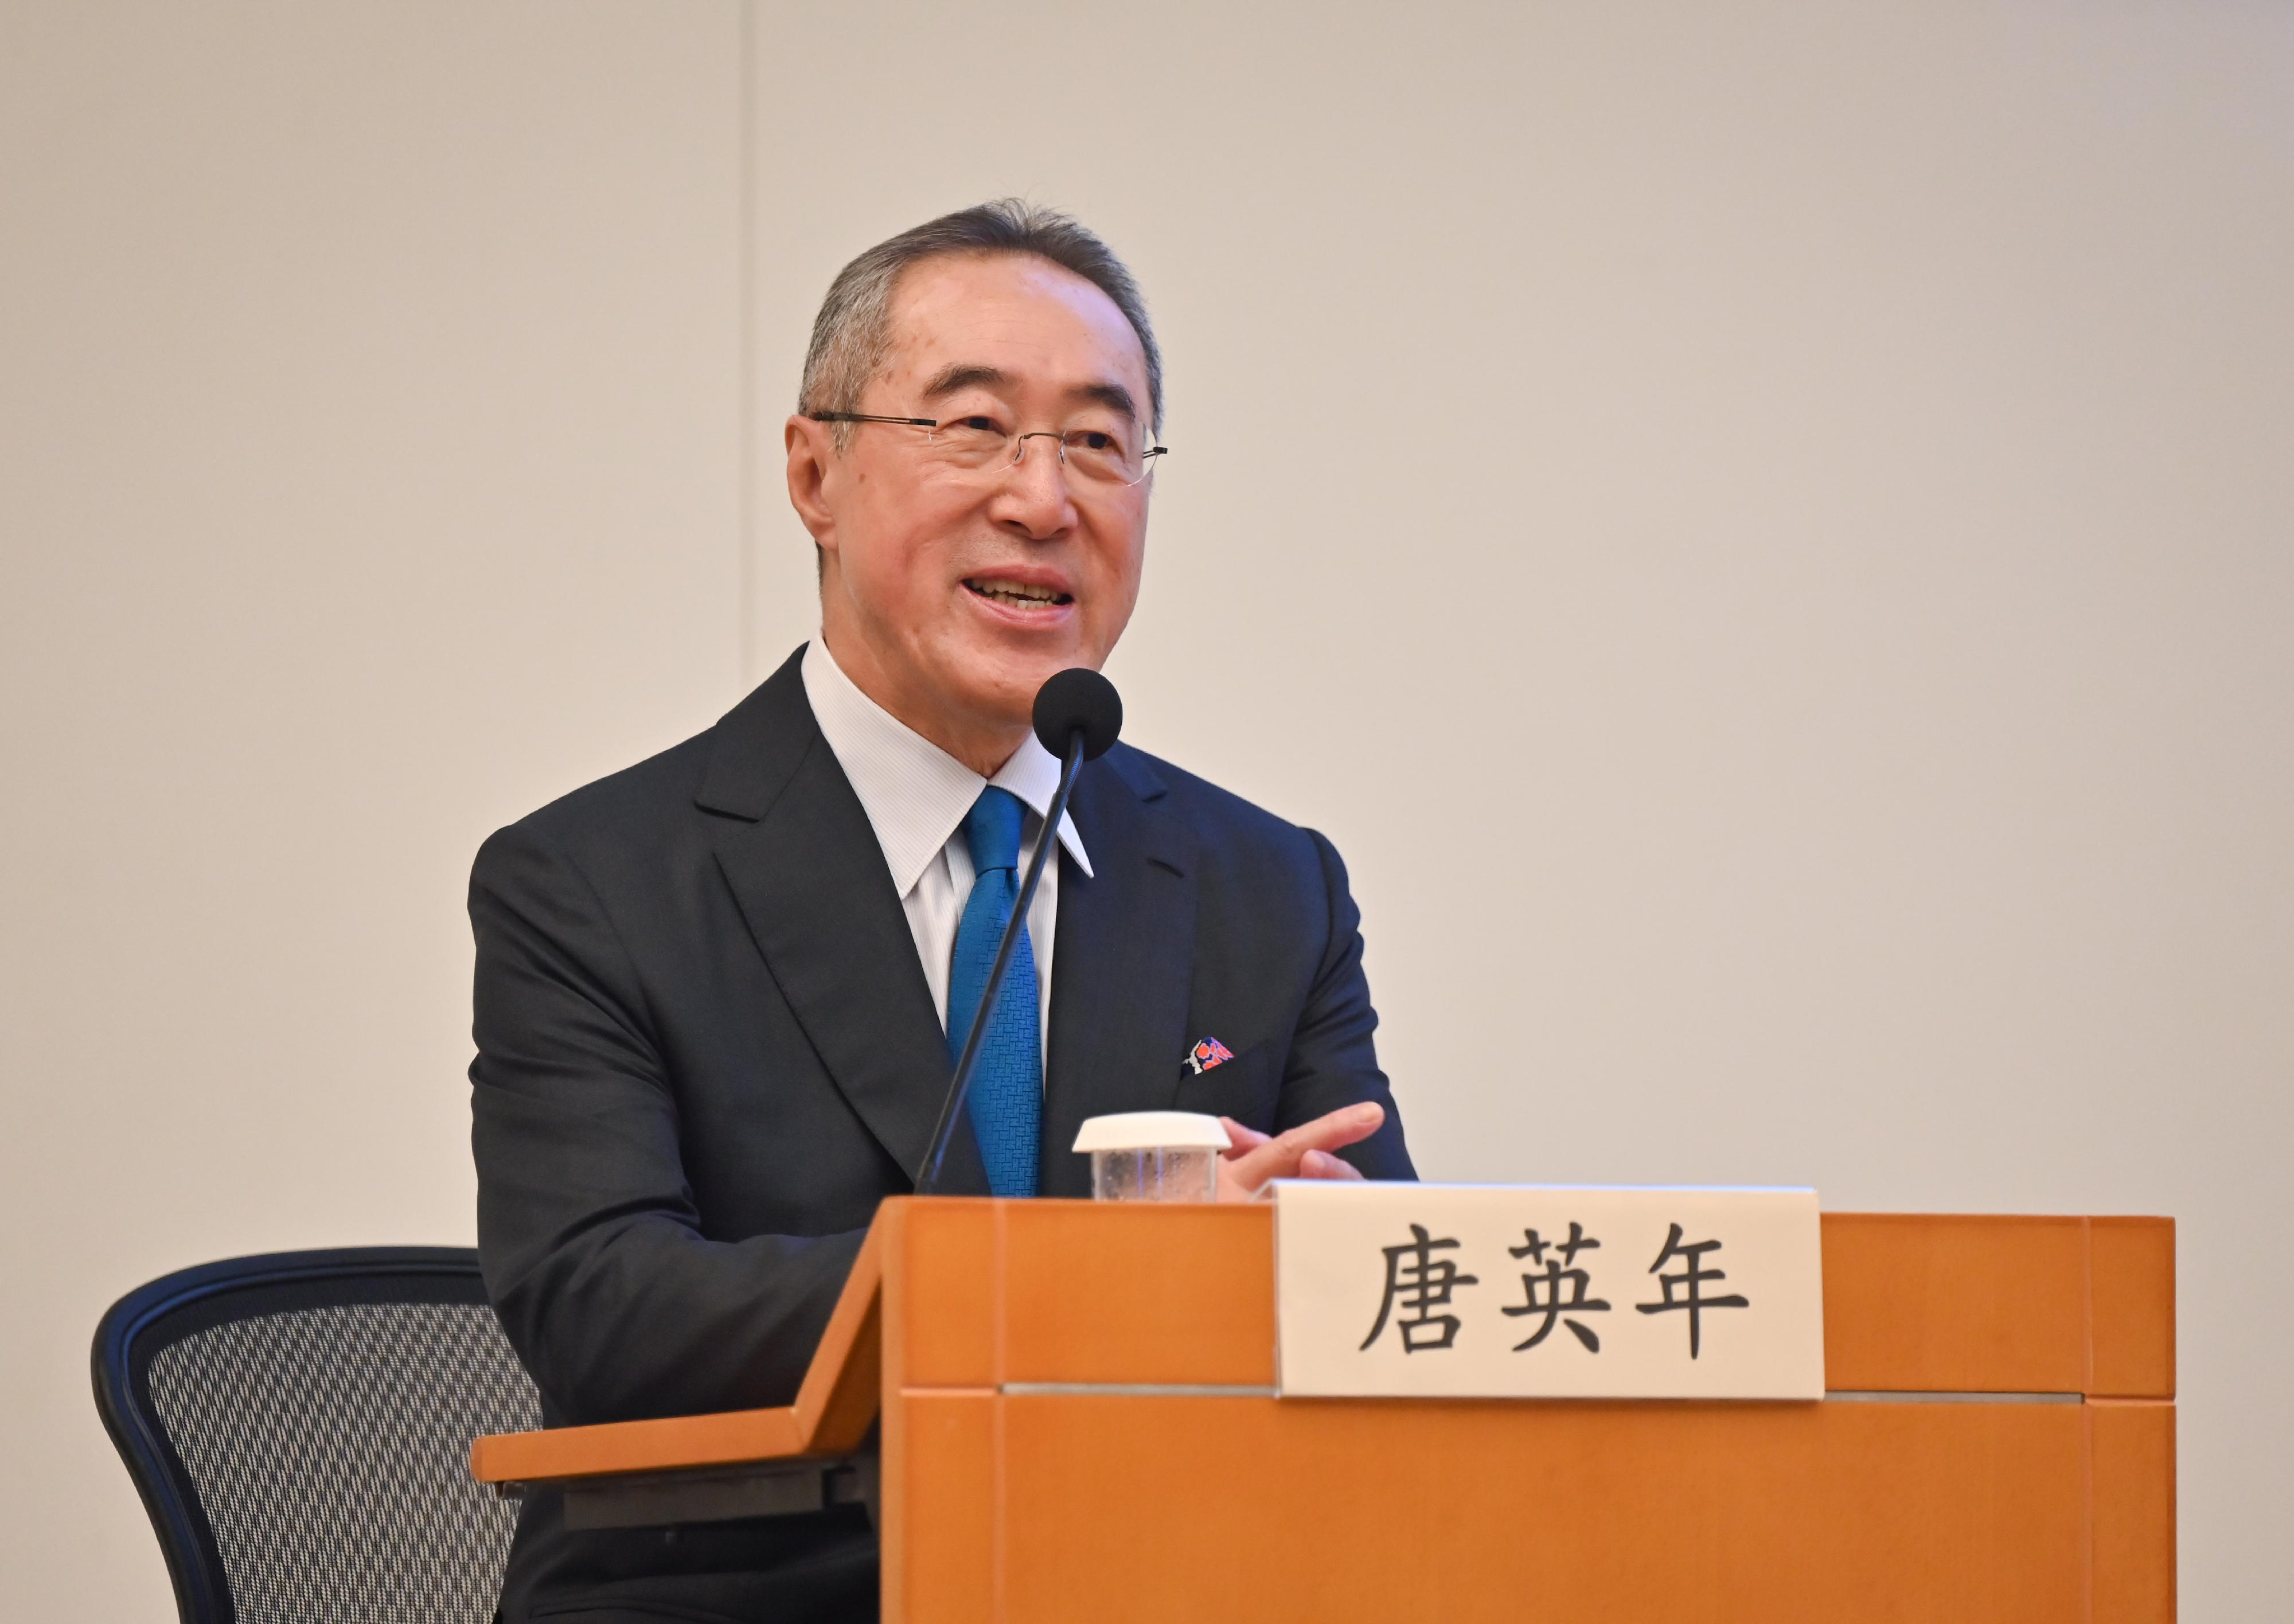 The Hong Kong Special Administrative Region Government today (March 24) held a sharing session on the spirit of "two sessions" at the Central Government Offices. Photo shows Hong Kong member of the Standing Committee of the 14th Chinese People's Political Consultative Conference Mr Henry Tang sharing his views.